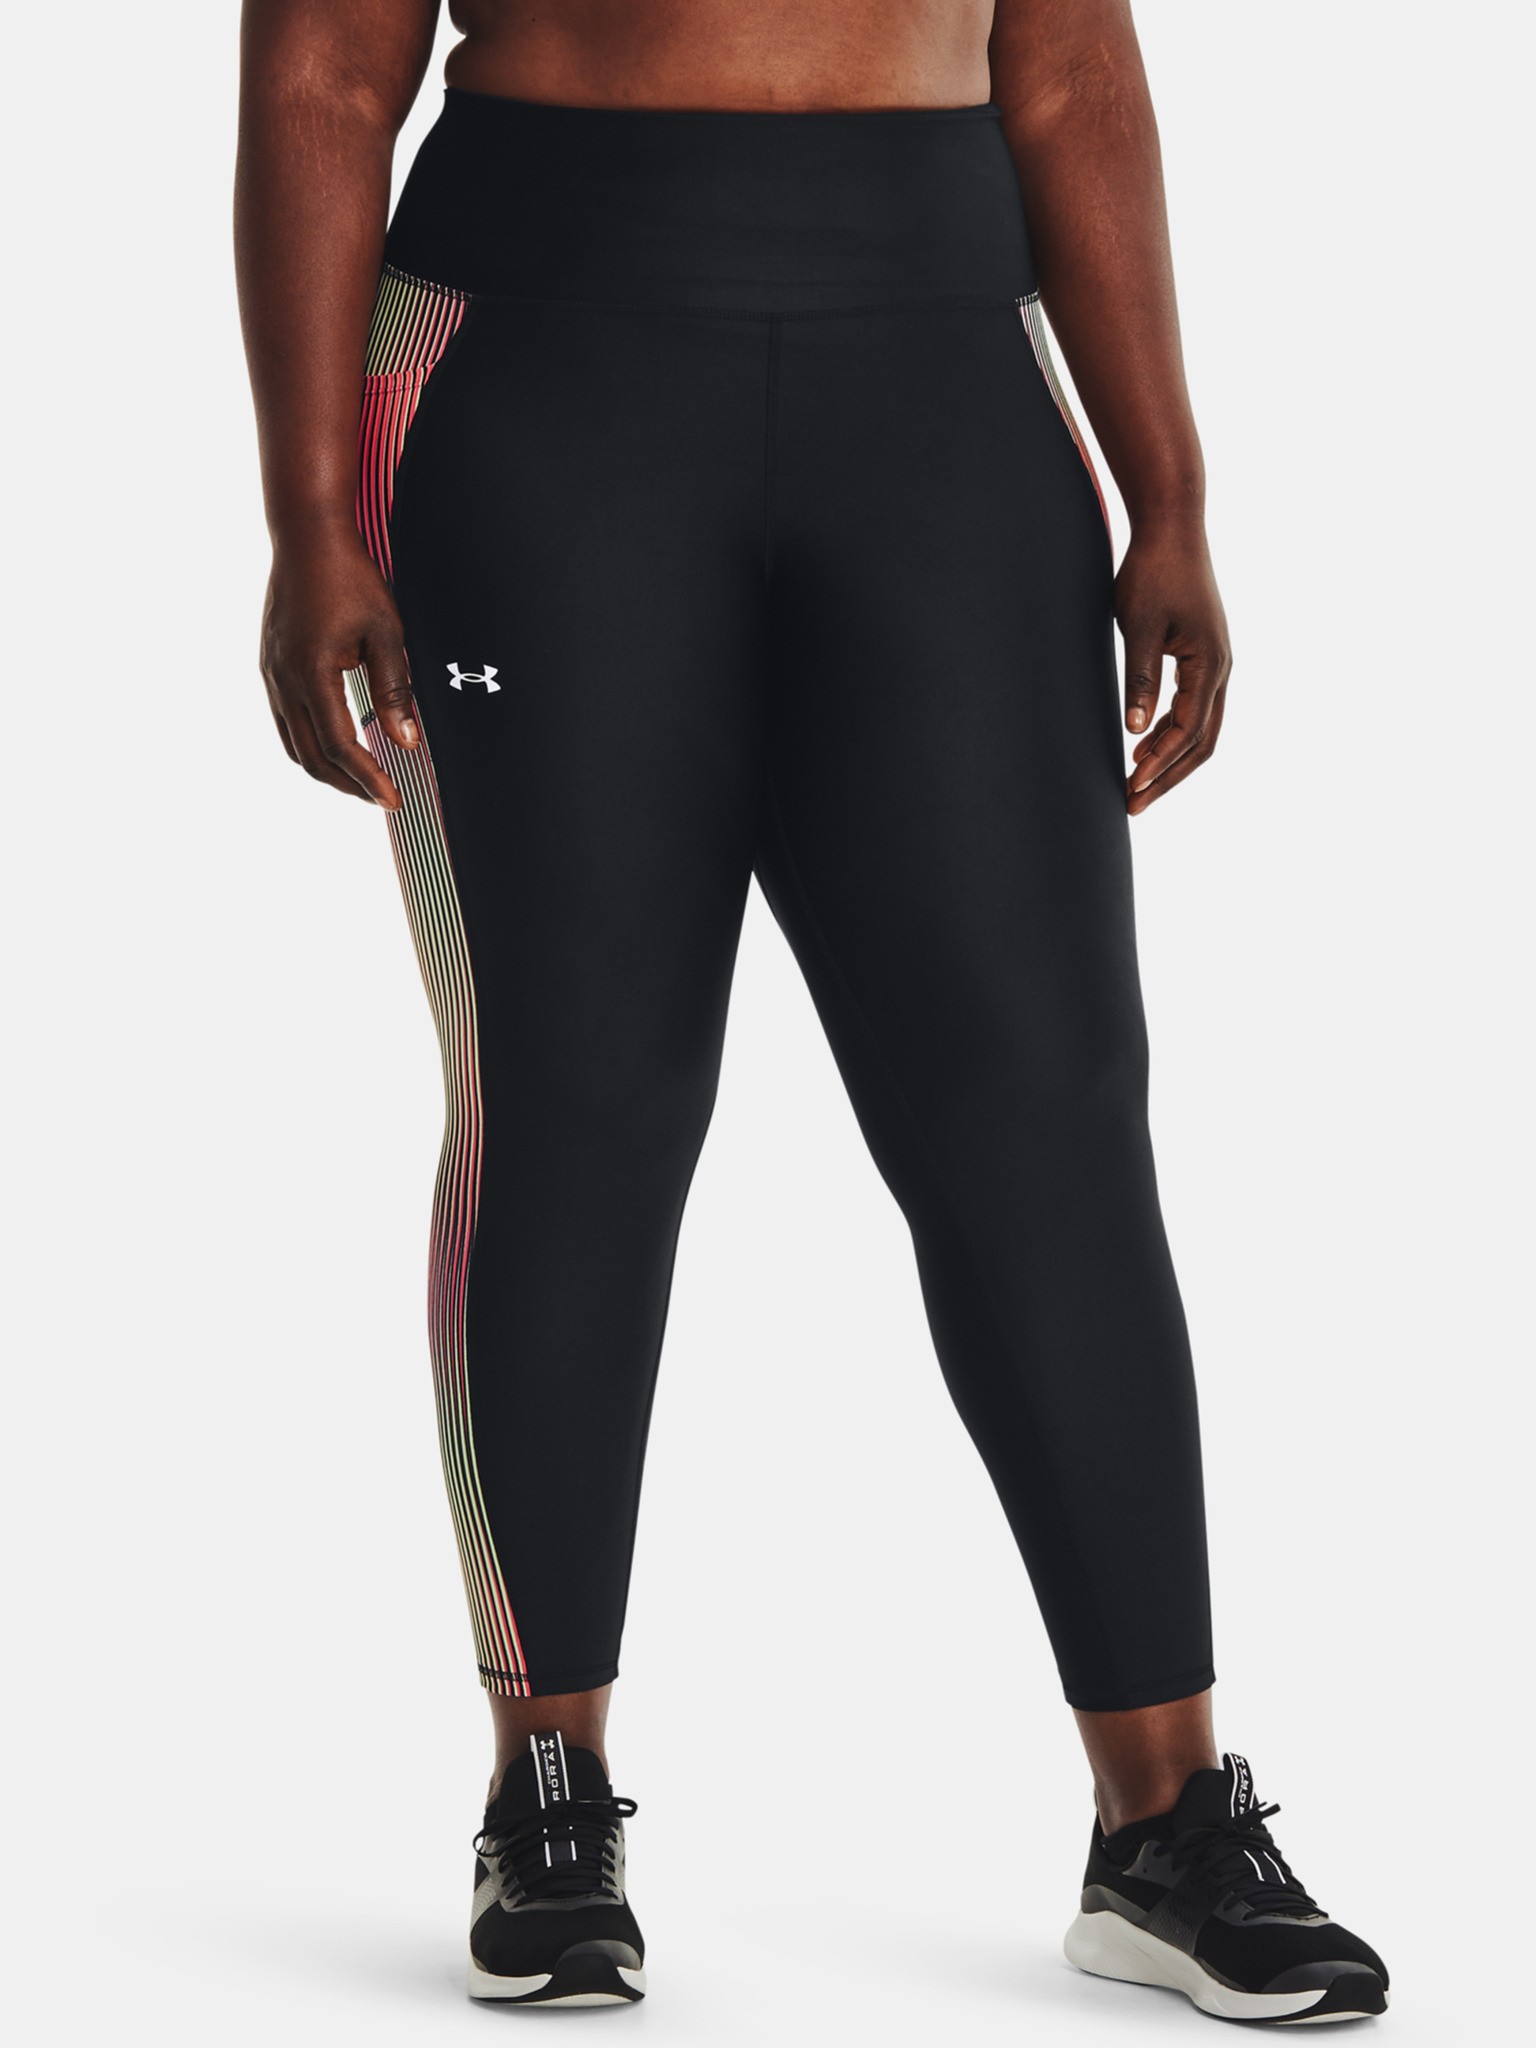 Under Armour SpeedPocket Ankle Tights Black / Neptune Once you run with UA  Speedpocket bottoms, you'll wonder how you ever ran without them. The  pocket expands to hold even a plus-sized phone,